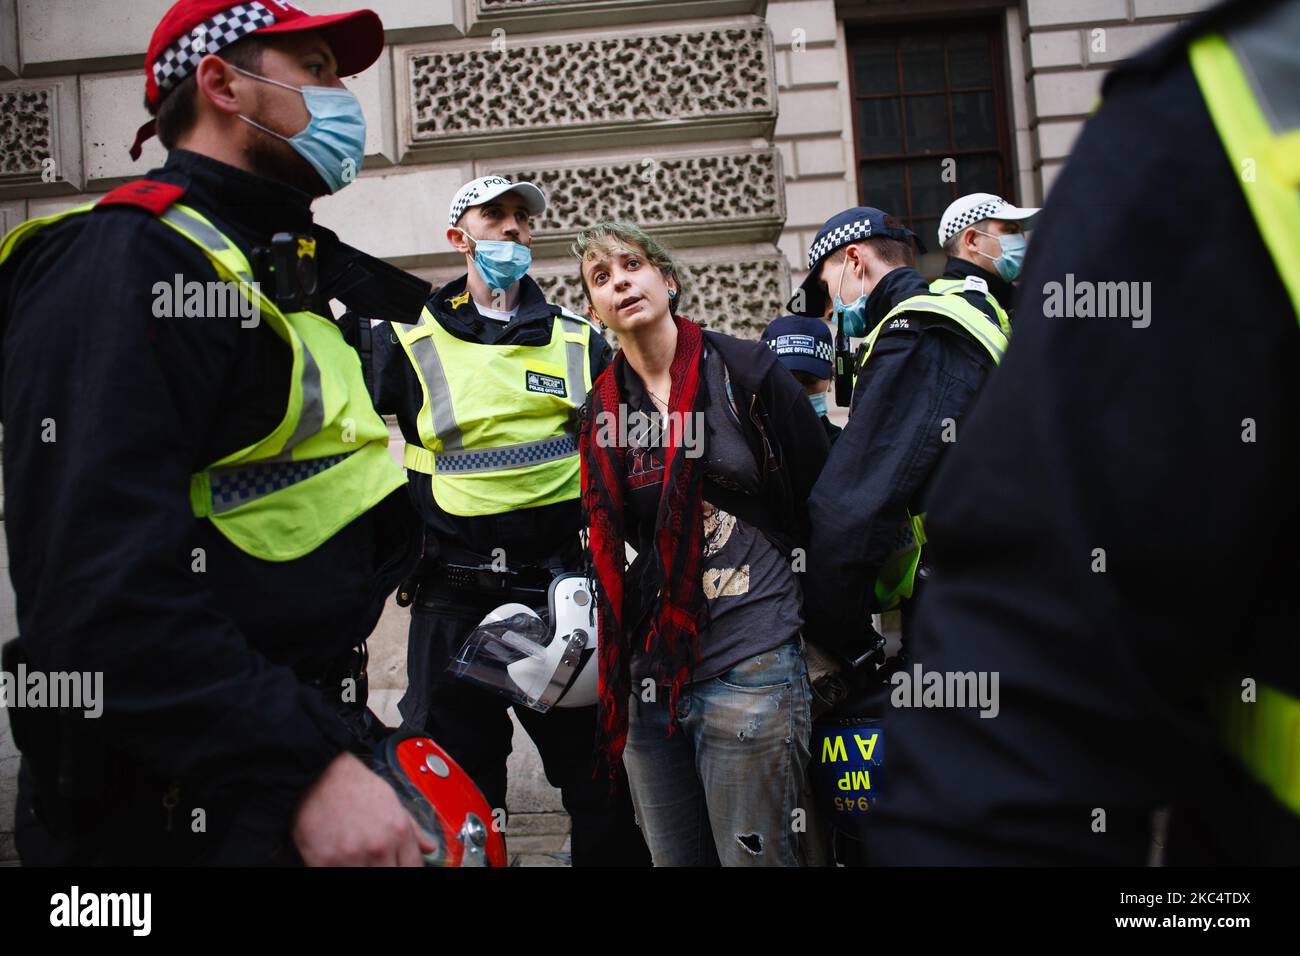 An anti-lockdown activist is arrested during a demonstration in London, England, on November 28, 2020. In an evening update the Metropolitan Police announced it had made 155 arrests over the course of the day's demonstrations, for offences including breaches of coronavirus regulations, assault on police and possession of drugs. London is to return to 'Tier 2' or 'high alert' covid-19 restrictions once the current England-wide coronavirus lockdown ends next Wednesday. All three of the tiers, assigned to local authorities across England, have been strengthened since the lockdown began on Novembe Stock Photo